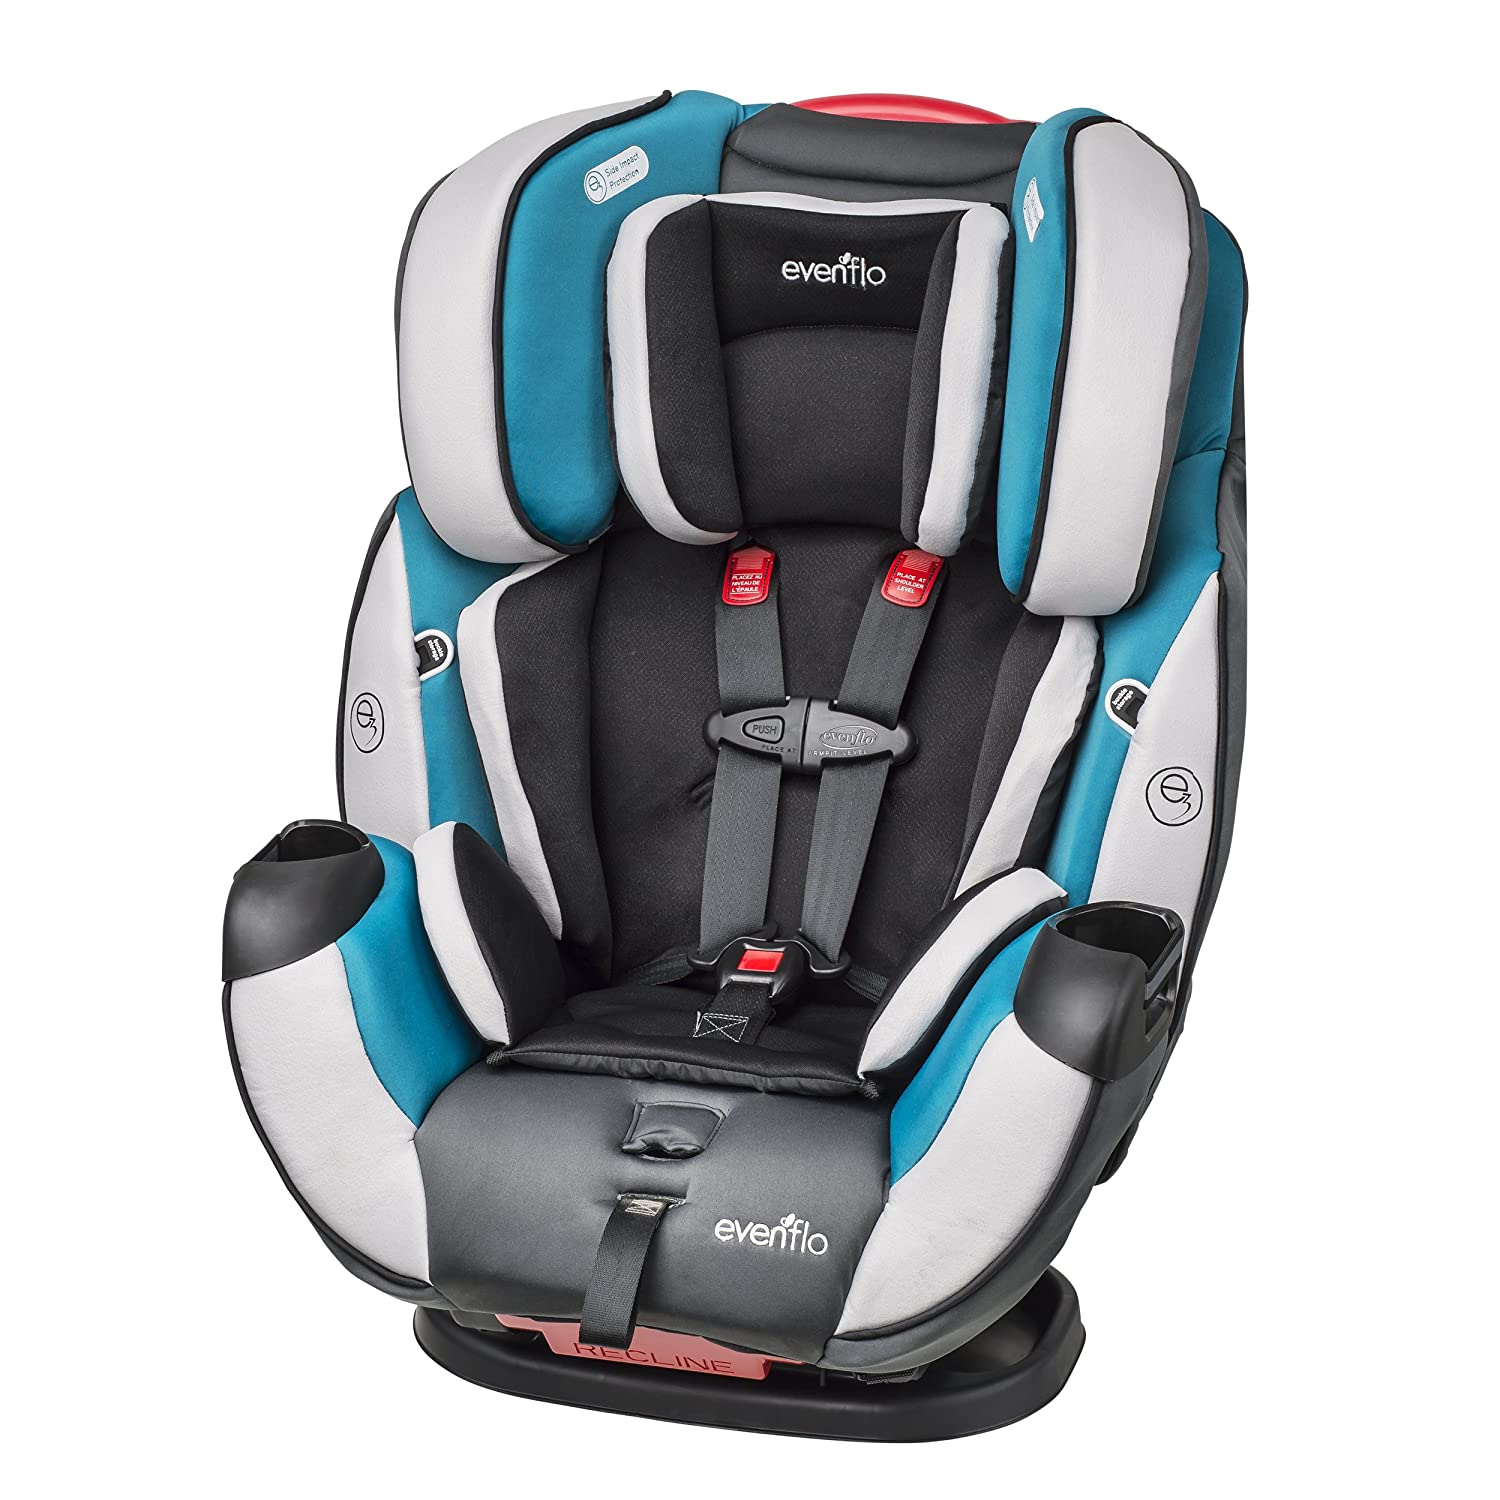 Top 5 Best Affordable Convertible Car Seats Reviews in 2022 1